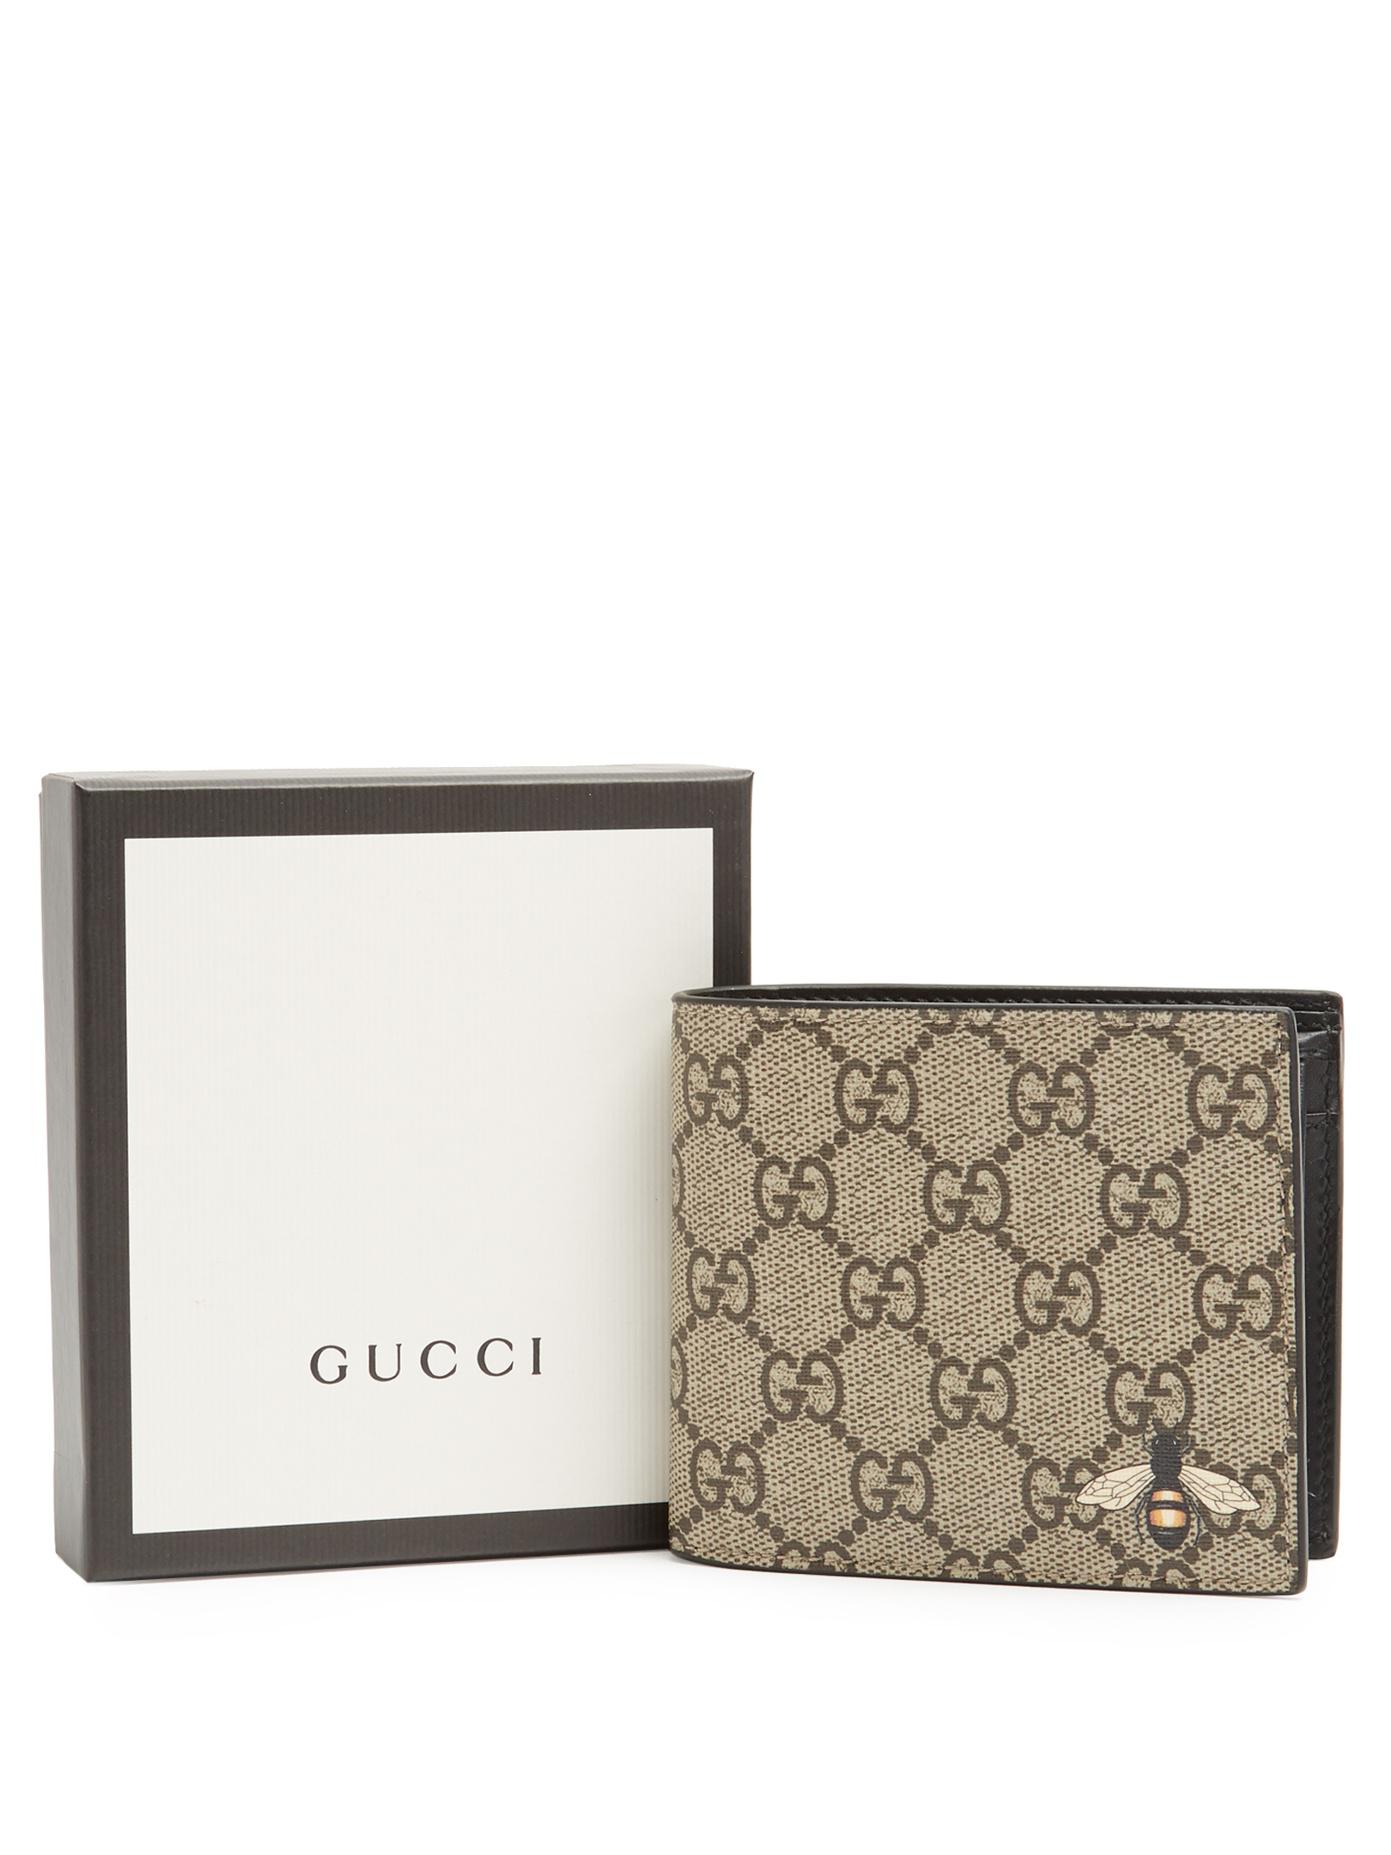 Gucci Canvas Gg Supreme Bee-print Wallet in Brown for Men - Lyst